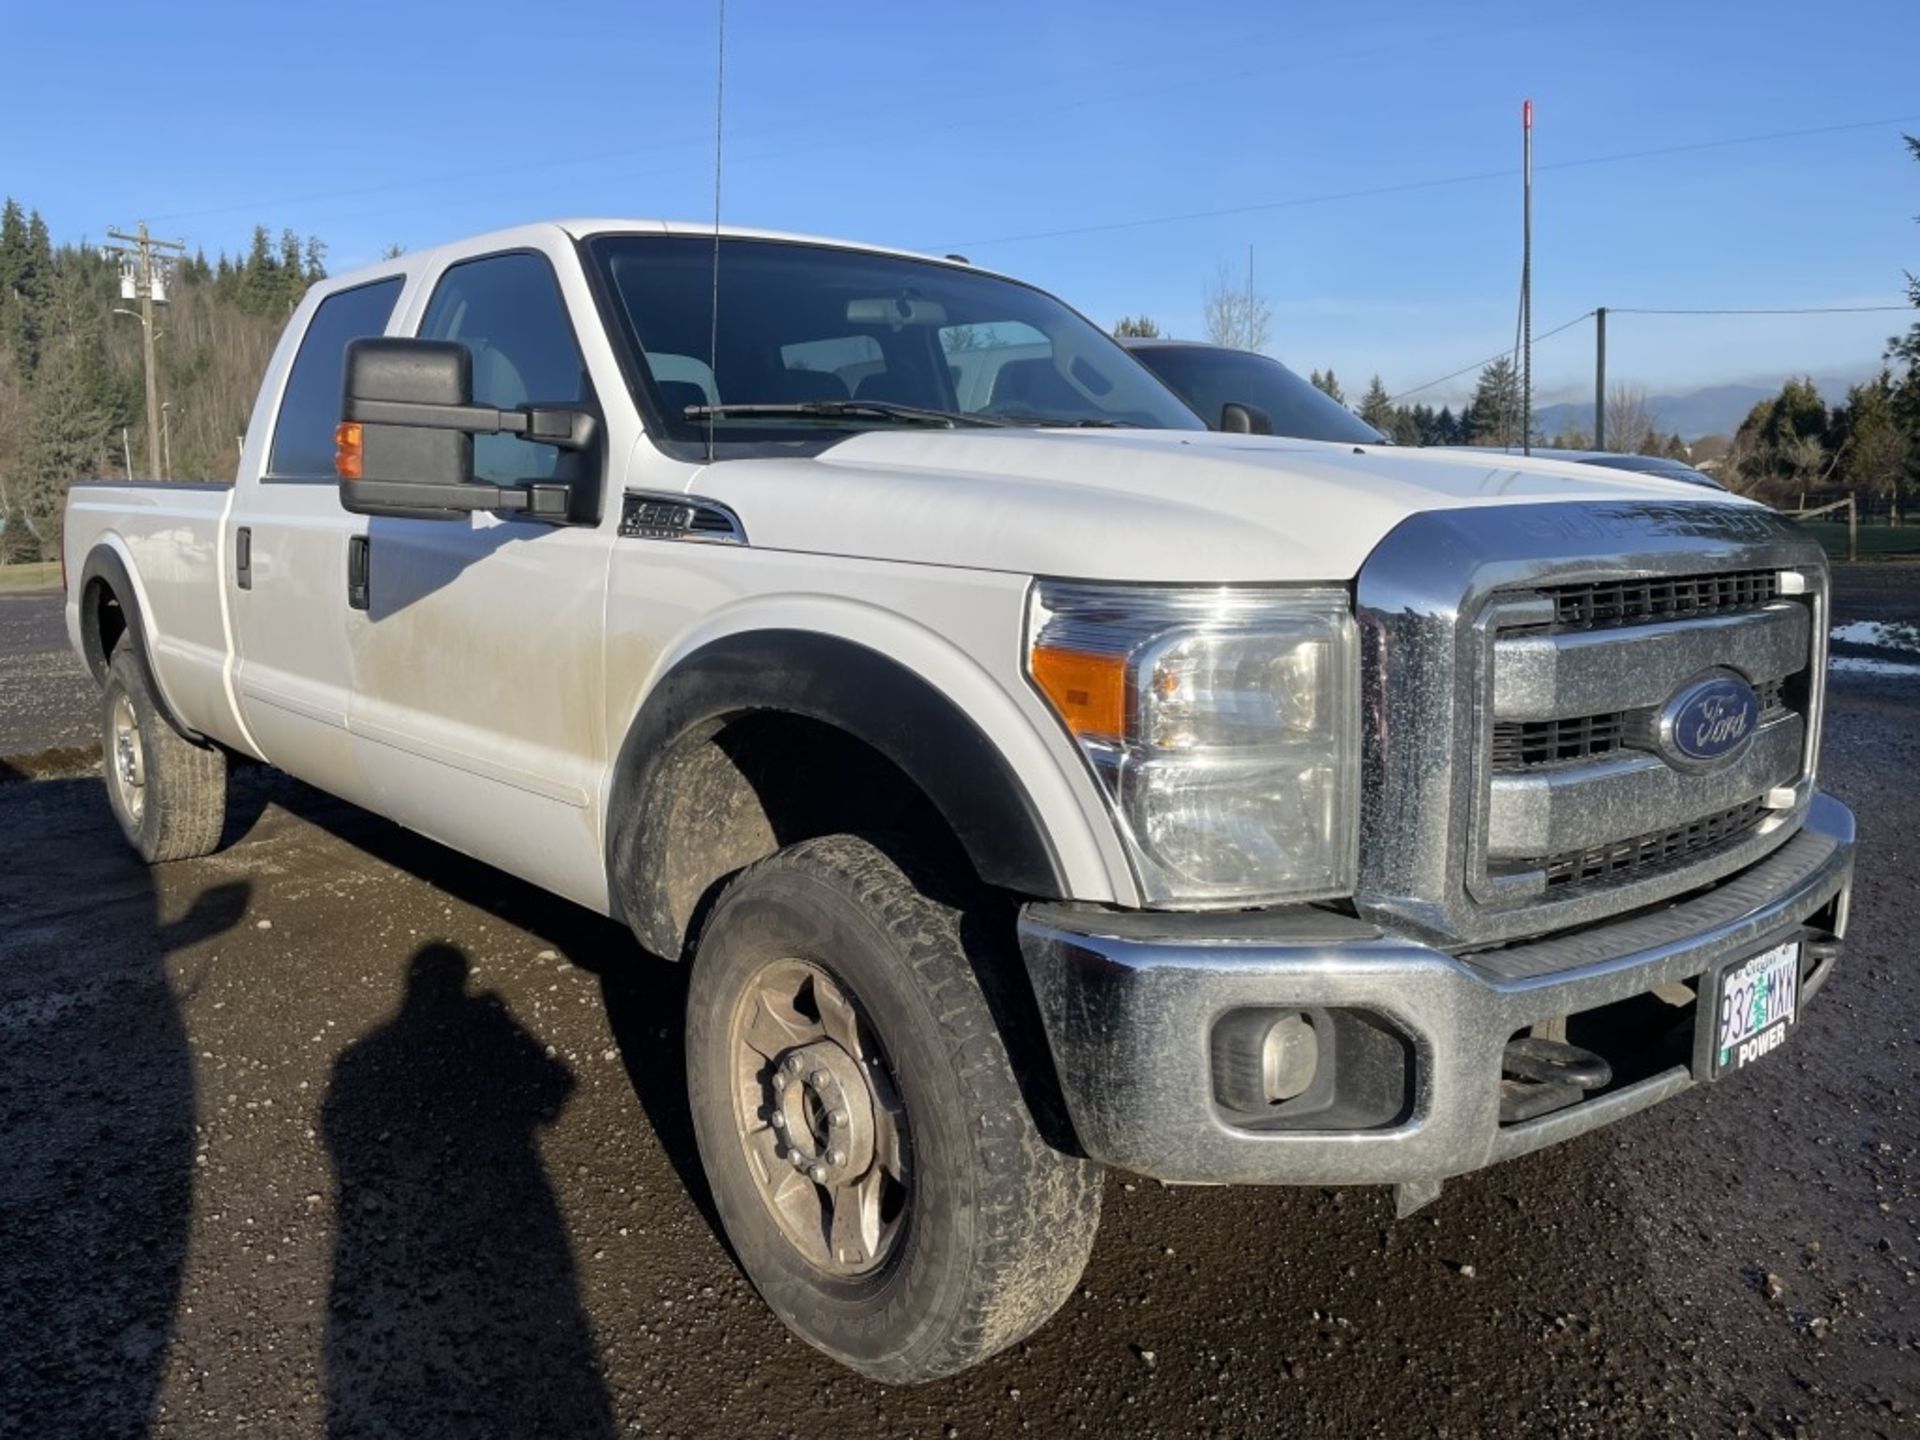 2015 Ford F350 XLT SD 4x4 Crew Cab Pickup - Image 2 of 22